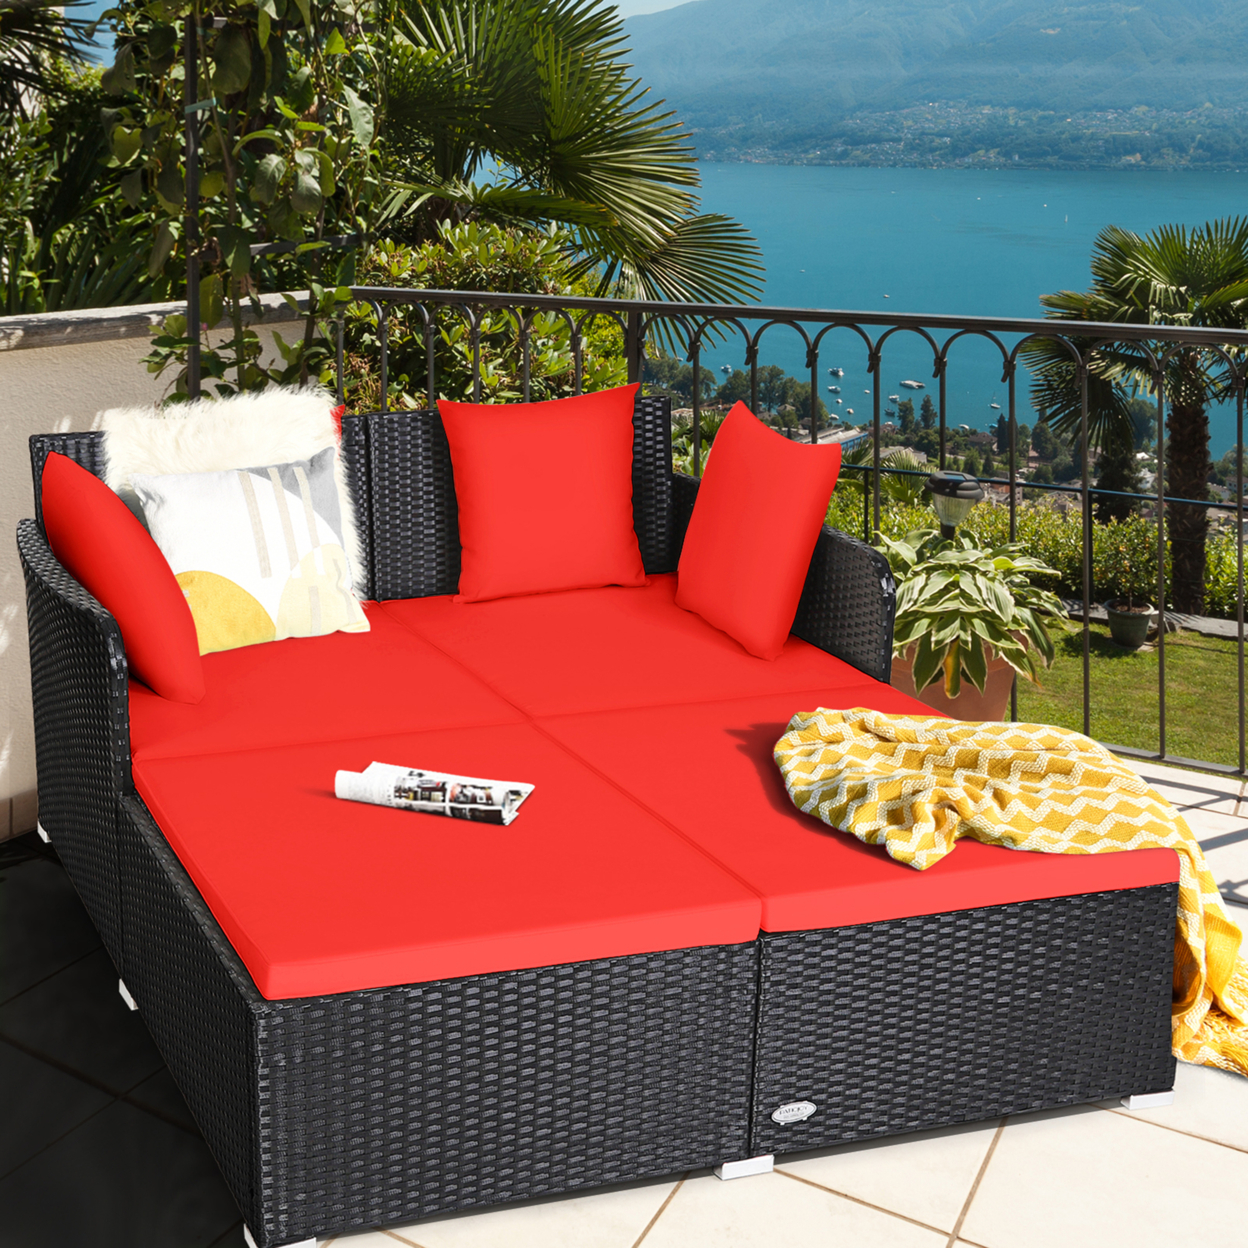 Rattan Patio Daybed Loveseat Sofa Yard Outdoor W/ Red Cushions Pillows